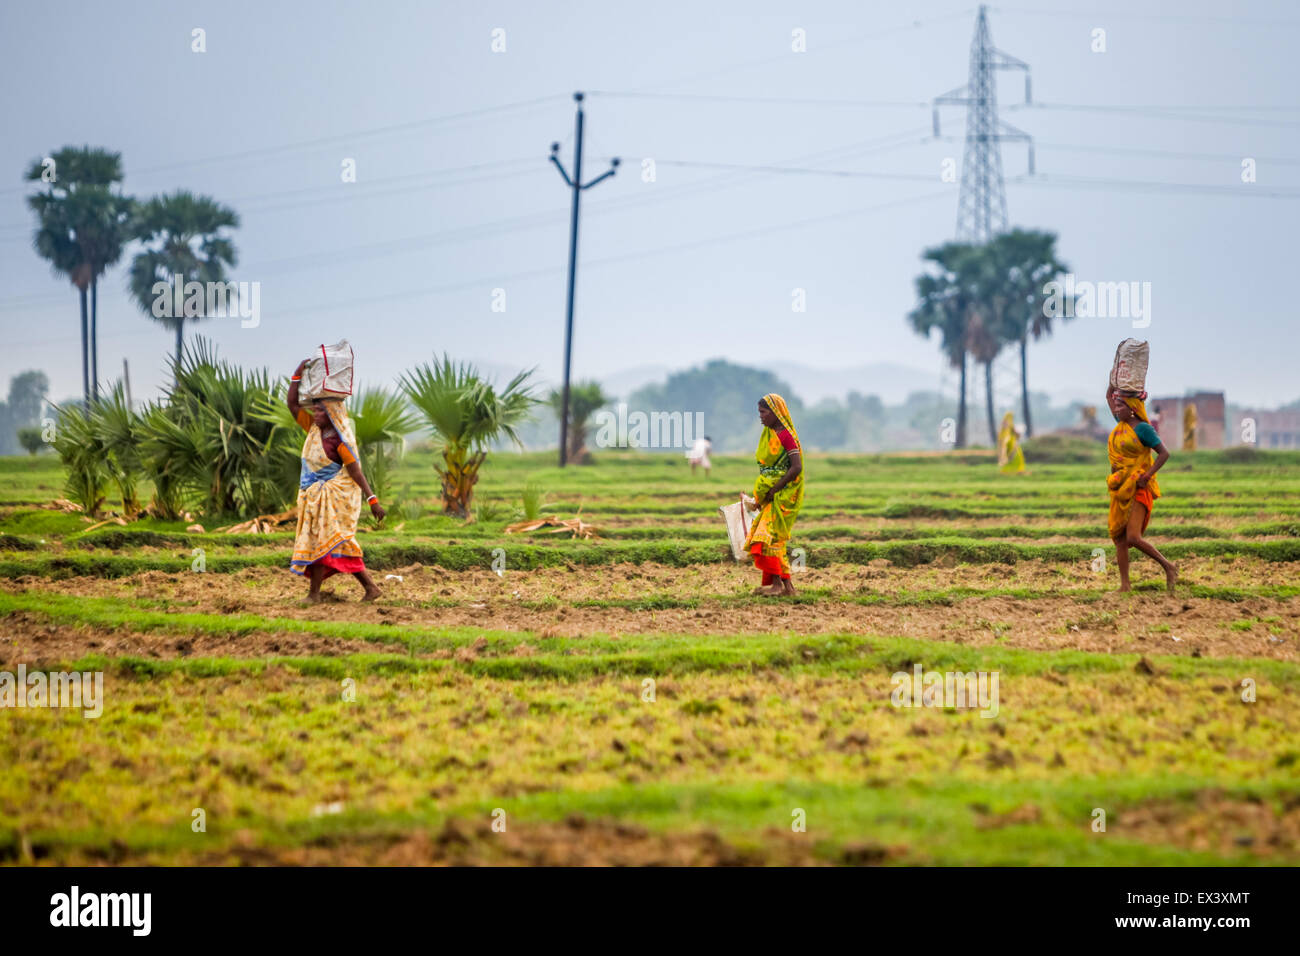 Indian women carrying goods as they are walking through farmland in Rajgir, India. Stock Photo